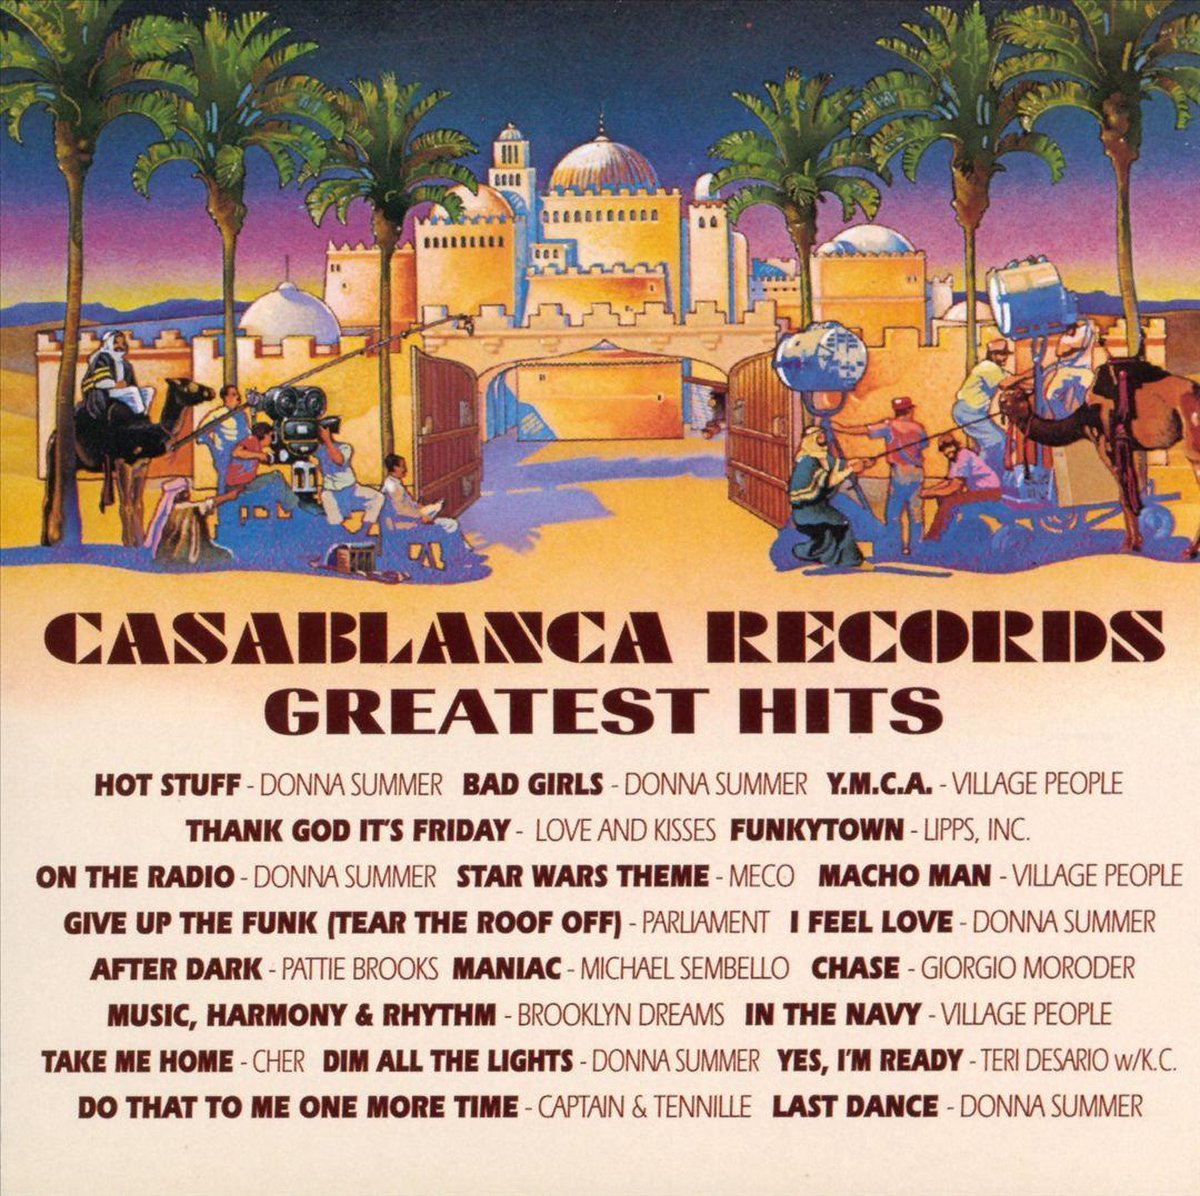 Casablanca Records Greatest Hits - various artists